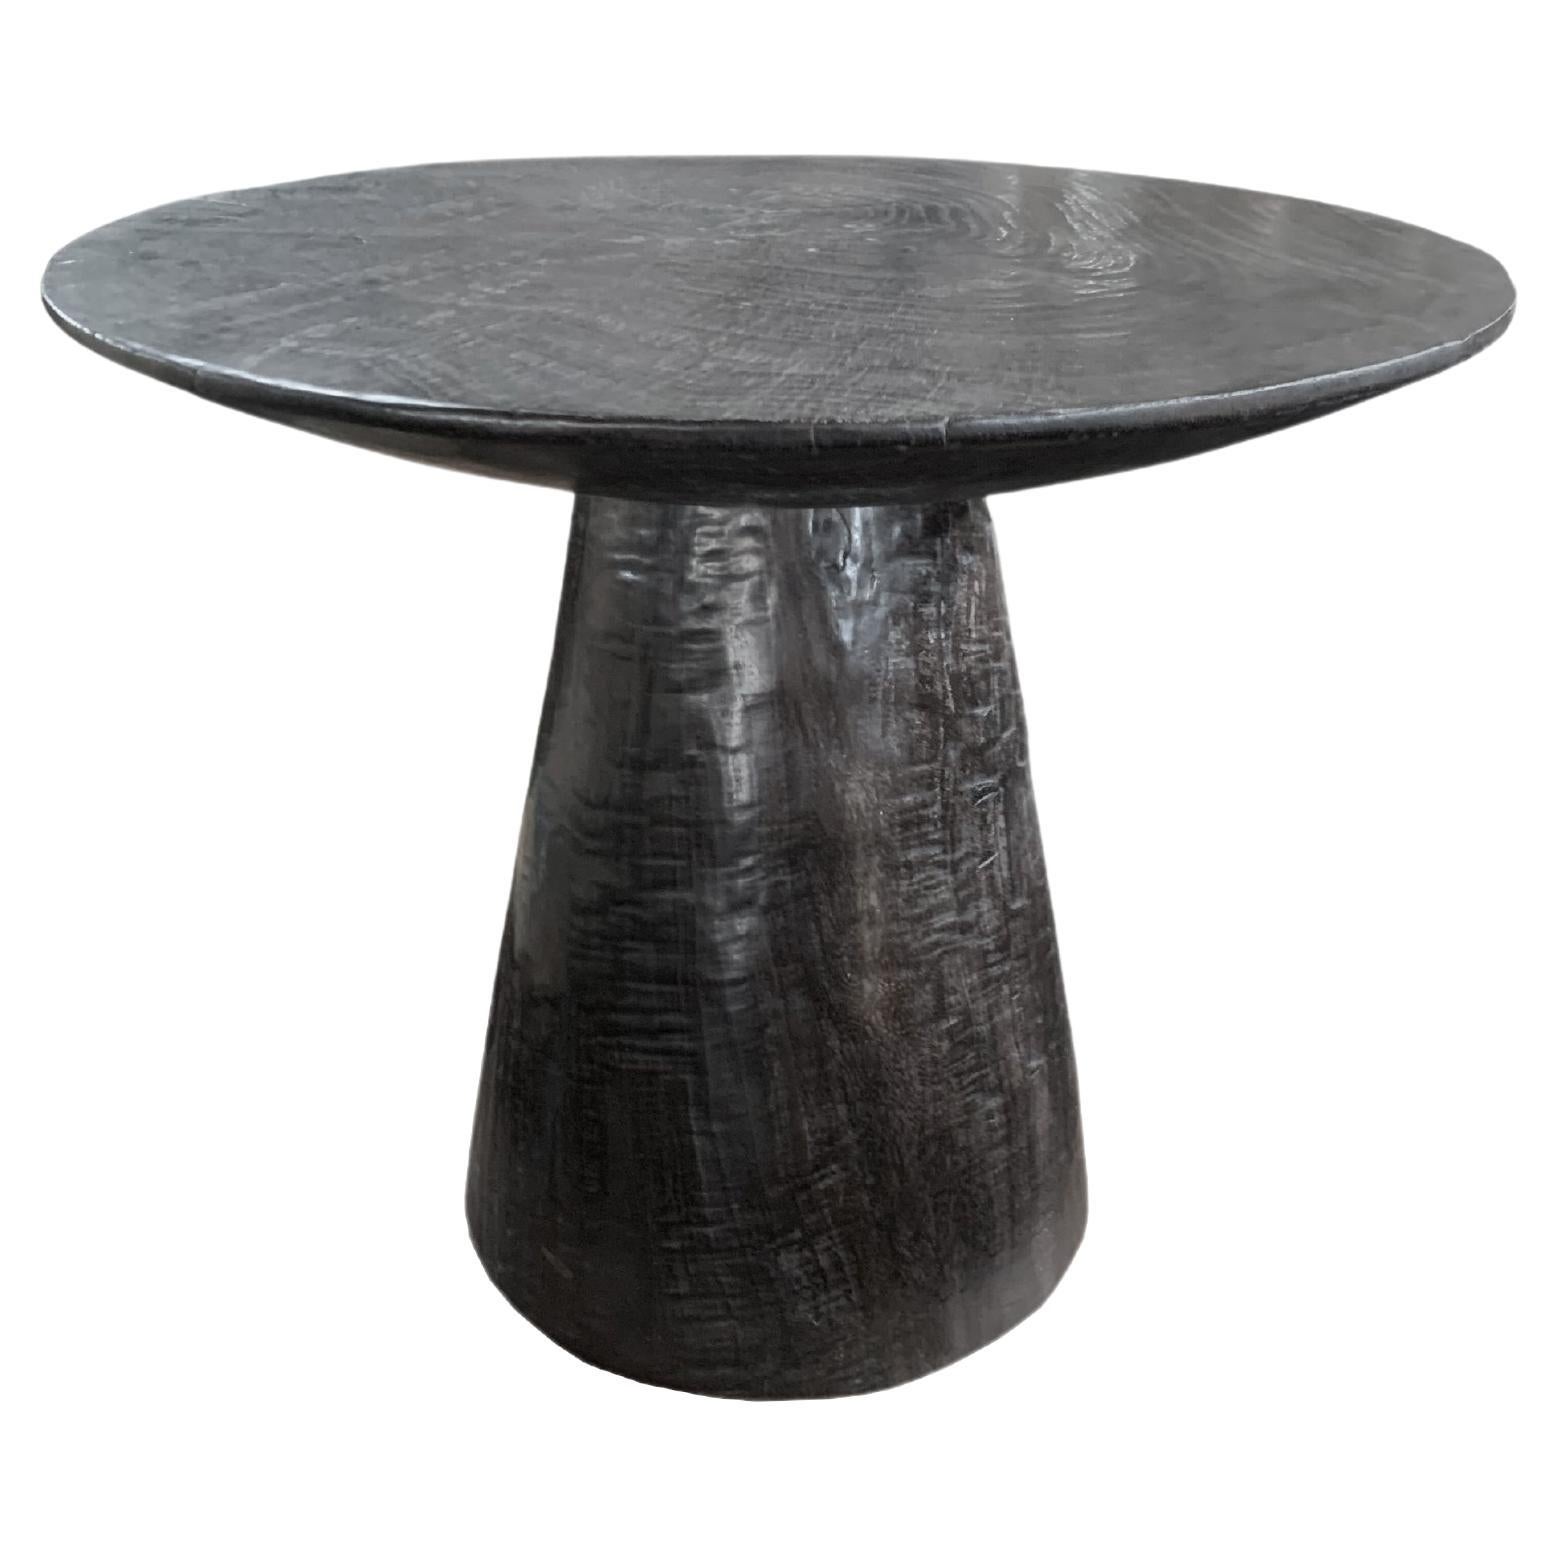 Sculptural Round Table Crafted from Mango Wood, Burnt Finish, Modern Organic